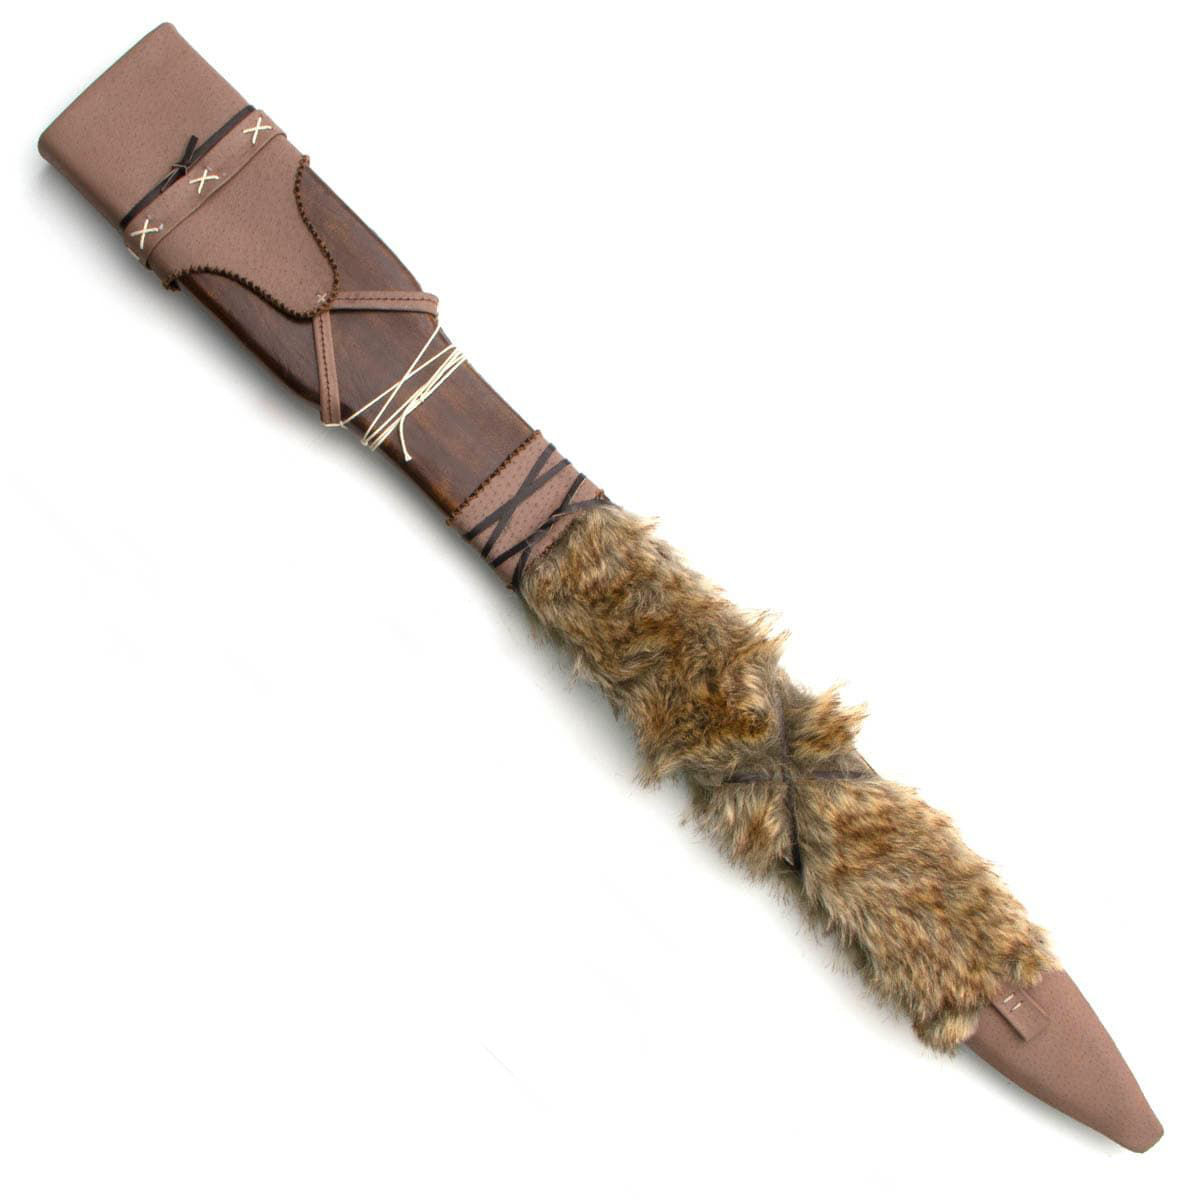 Conan Atlantean Sword Molded Leather Scabbard accented with matte-finished leather, faux fur, leather bands, cord, and brass